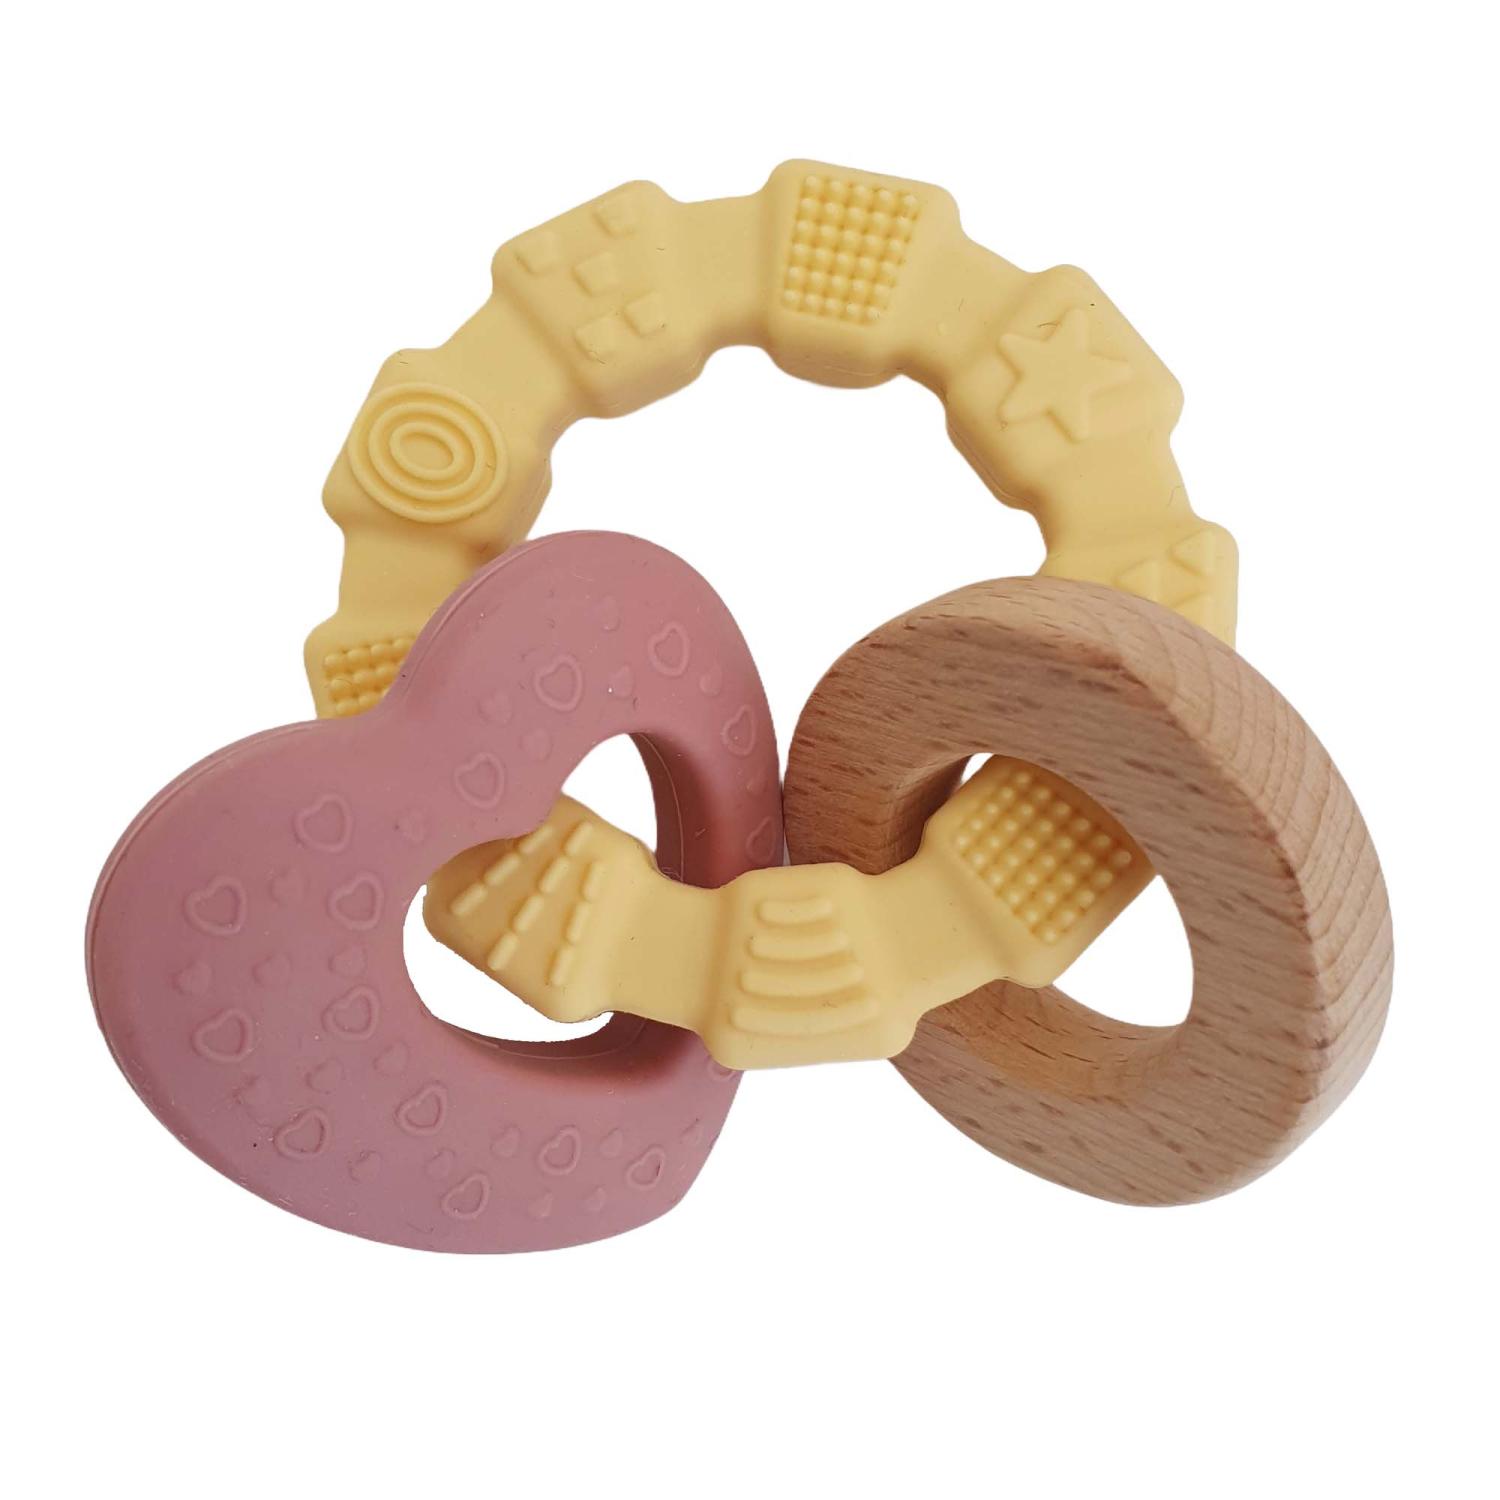 Teether toy heart dusty rose